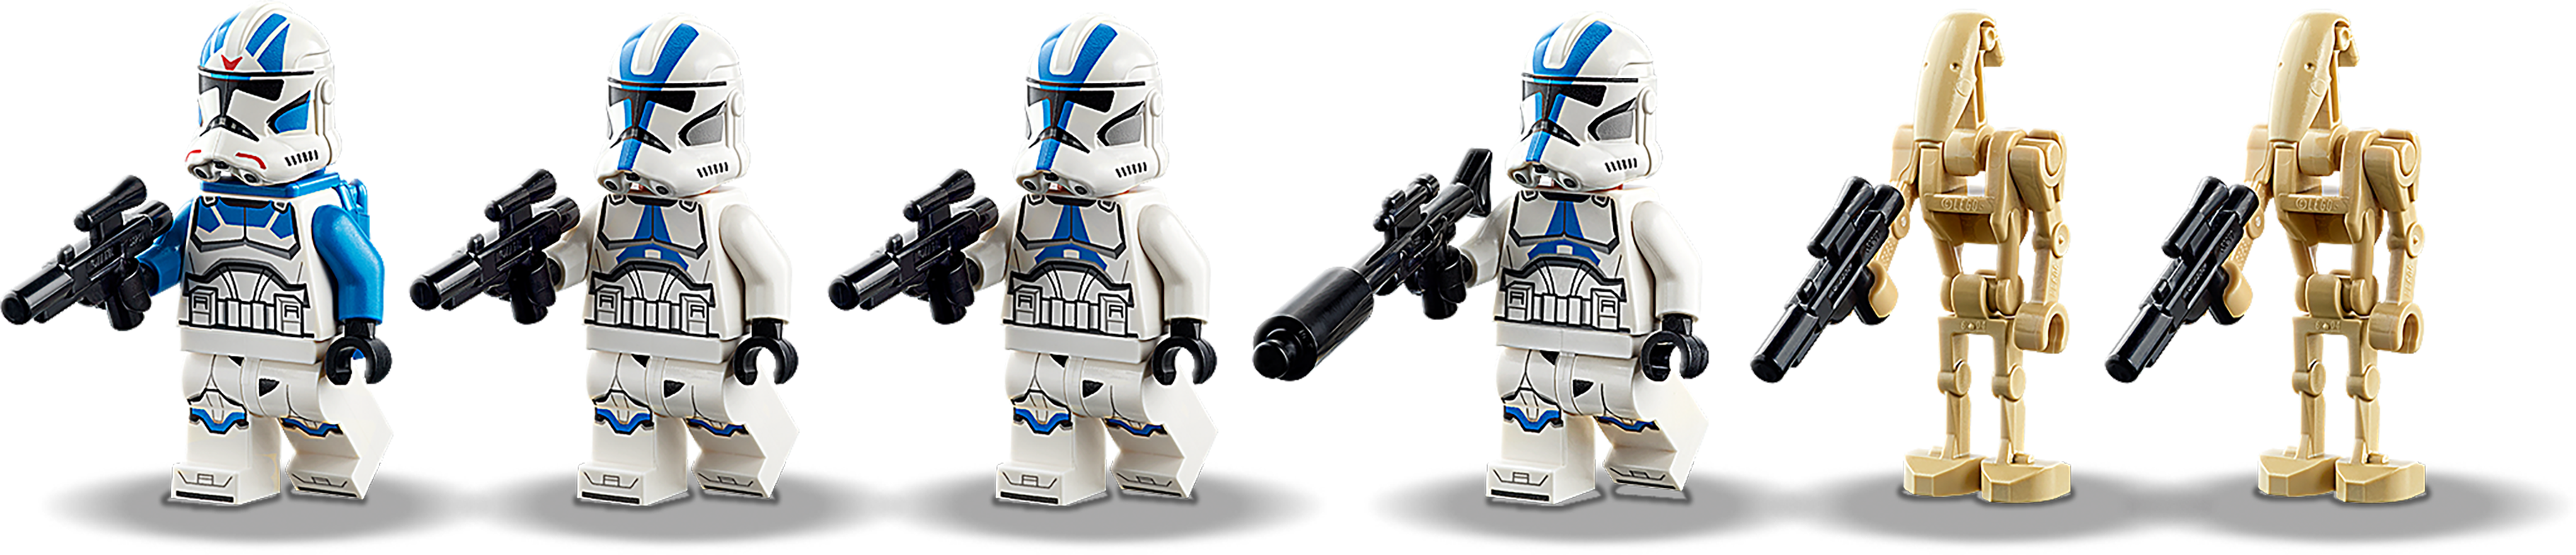 lego star wars clones for sale